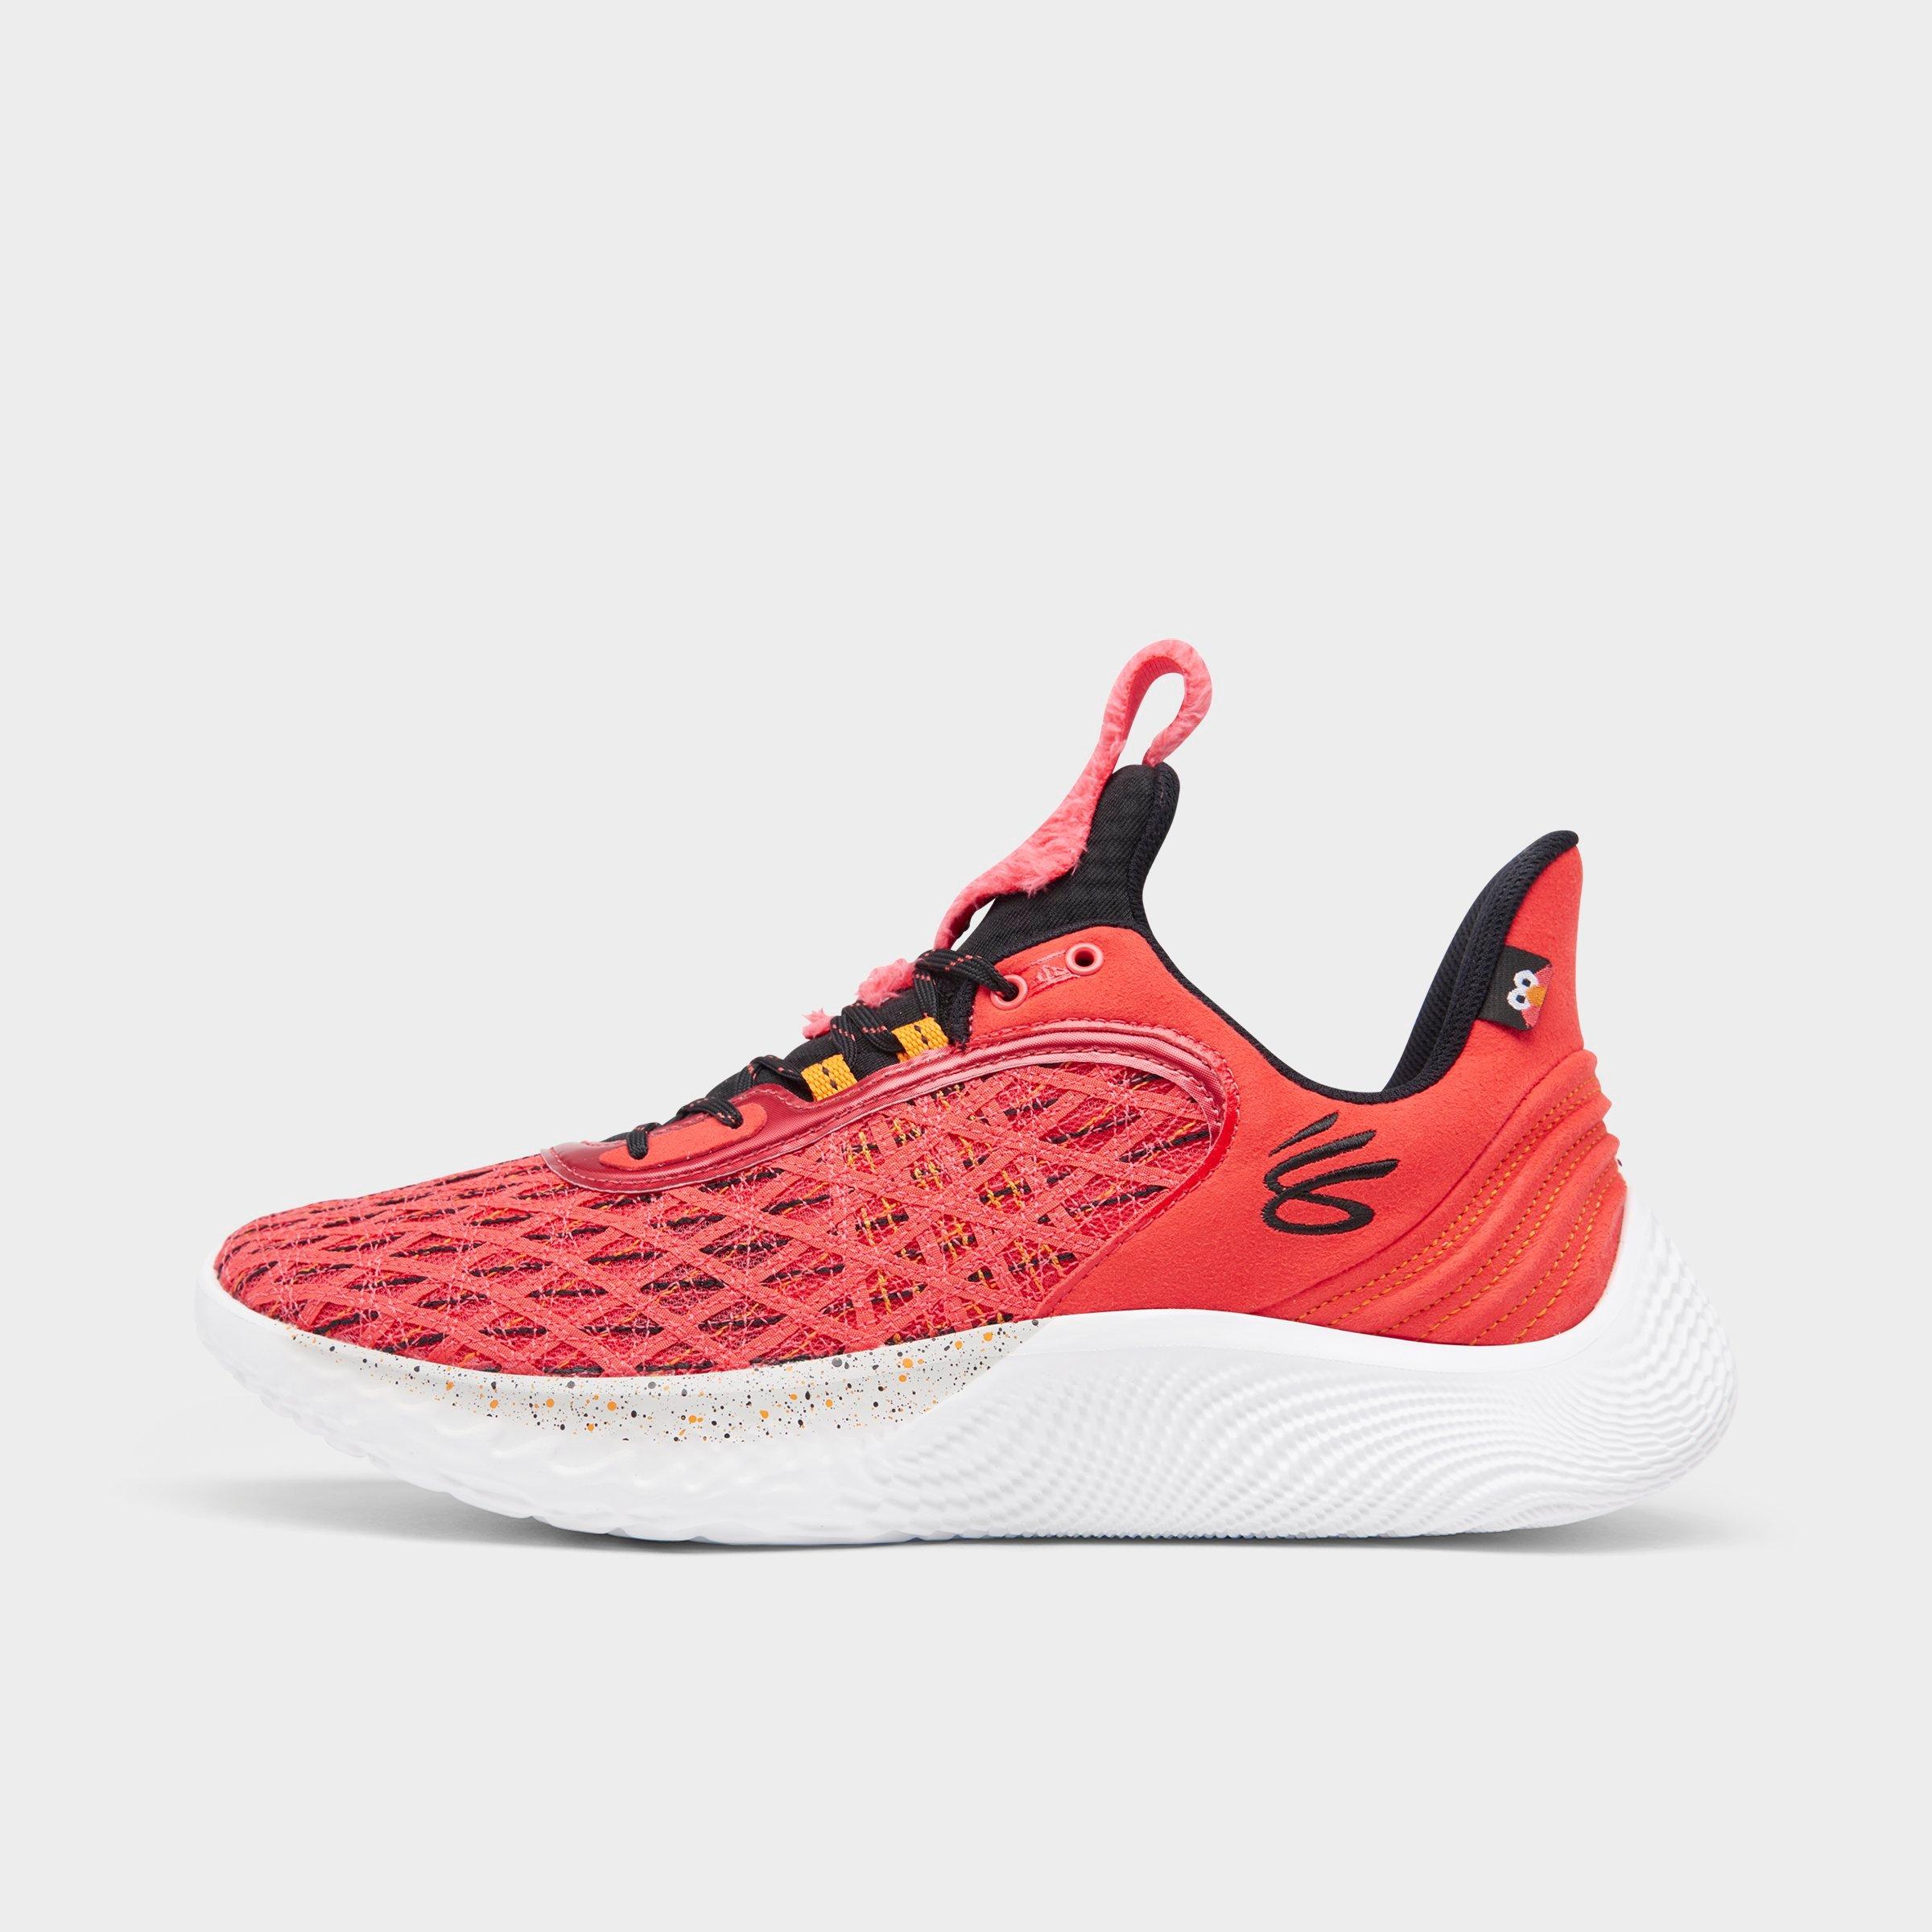 Under Armour Curry Flow 9 X Sesame Street Basketball Shoes In Red/white ...